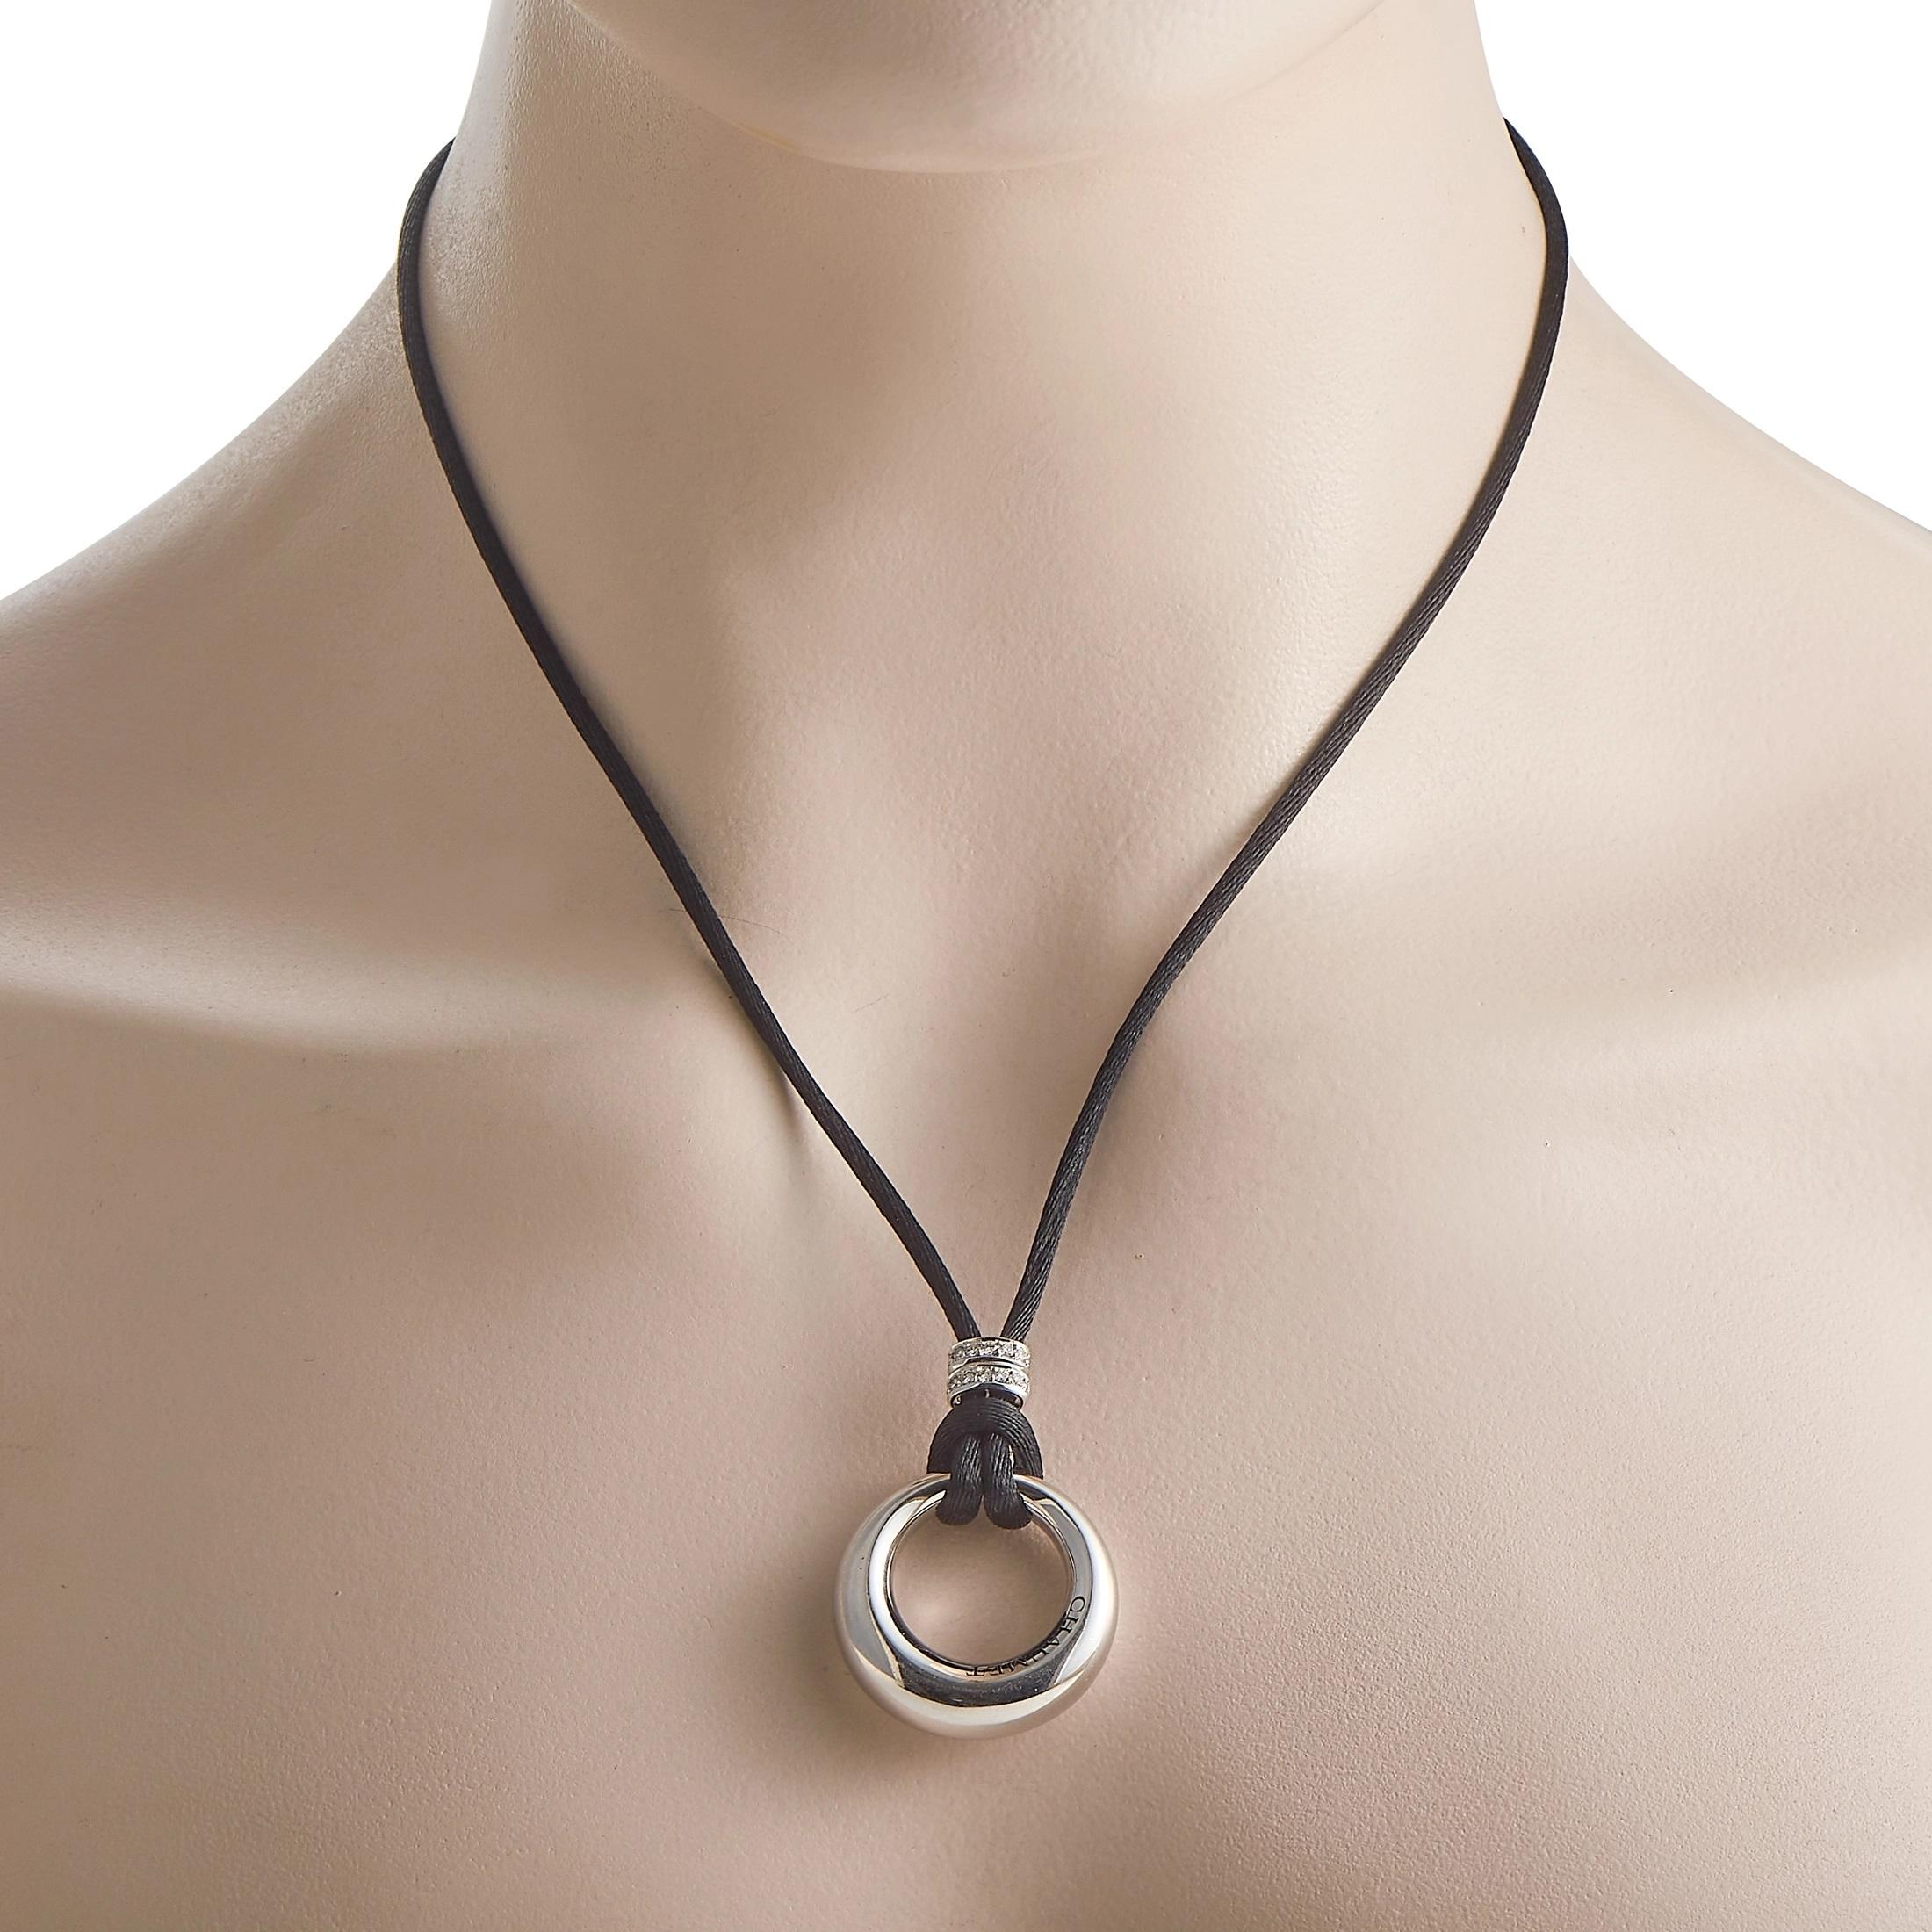 A sleek, circular 18K White Gold pendant measuring 1.5” long and 1.15” wide makes this Chaumet necklace a minimalist piece with a unique sense of style. Accented by glittering diamond charms, its suspended upon a contemporary 30” long black cord. 
